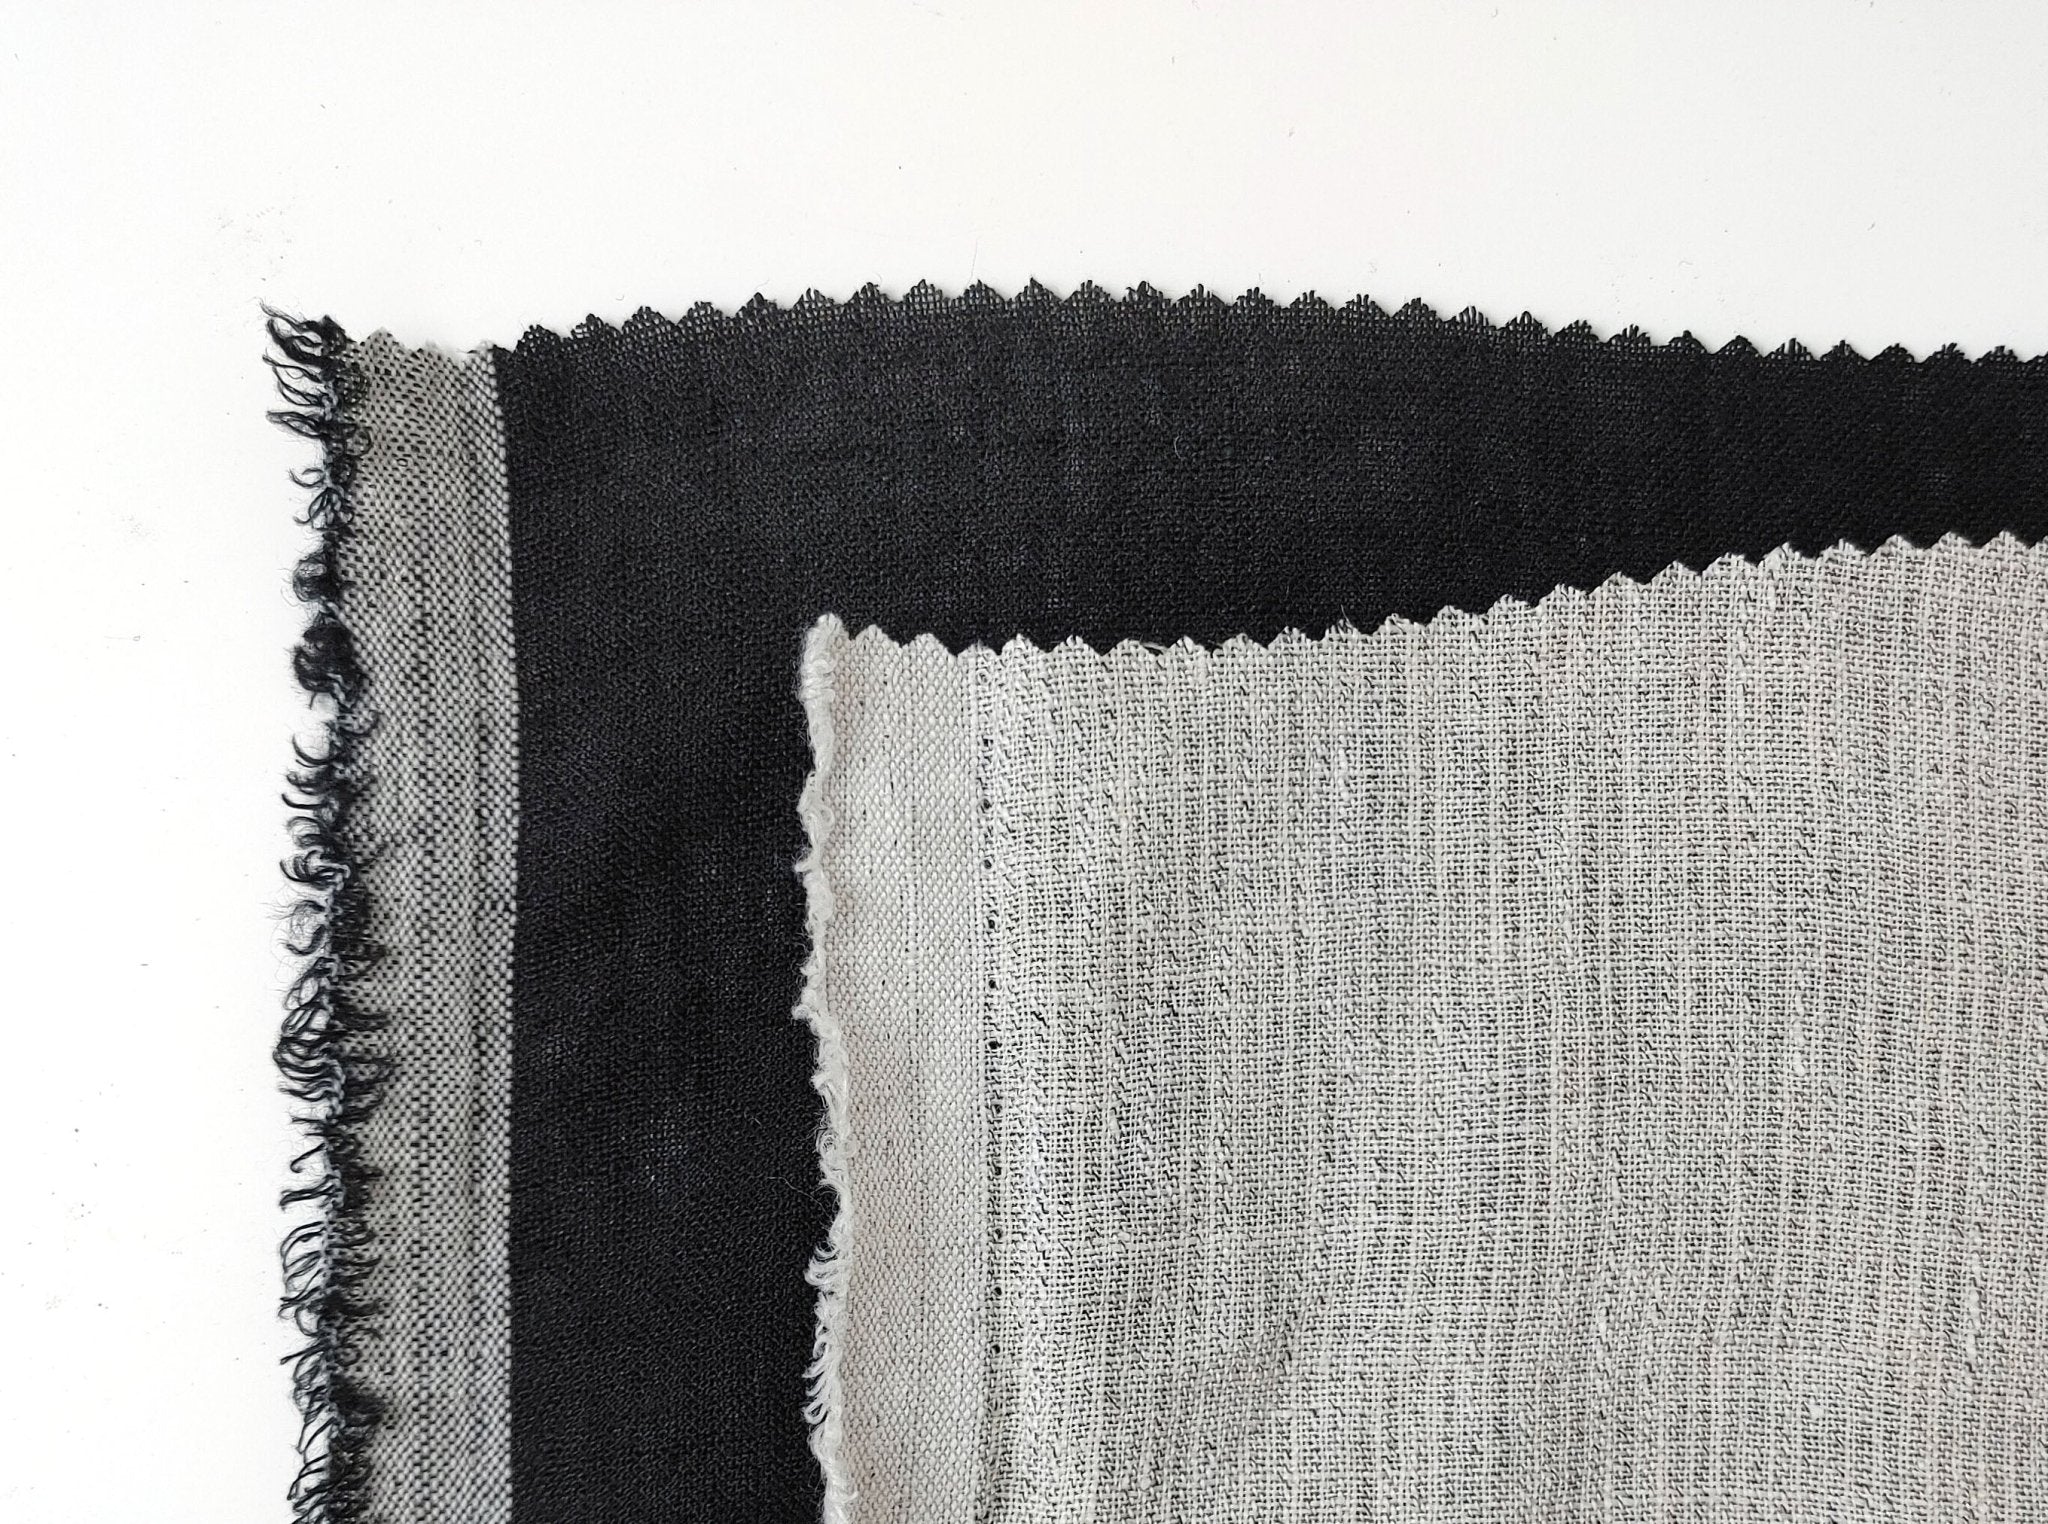 Linen Polyester Blend Fabric with Delicate Stripe Harmony 7749 7750 - The Linen Lab - Black